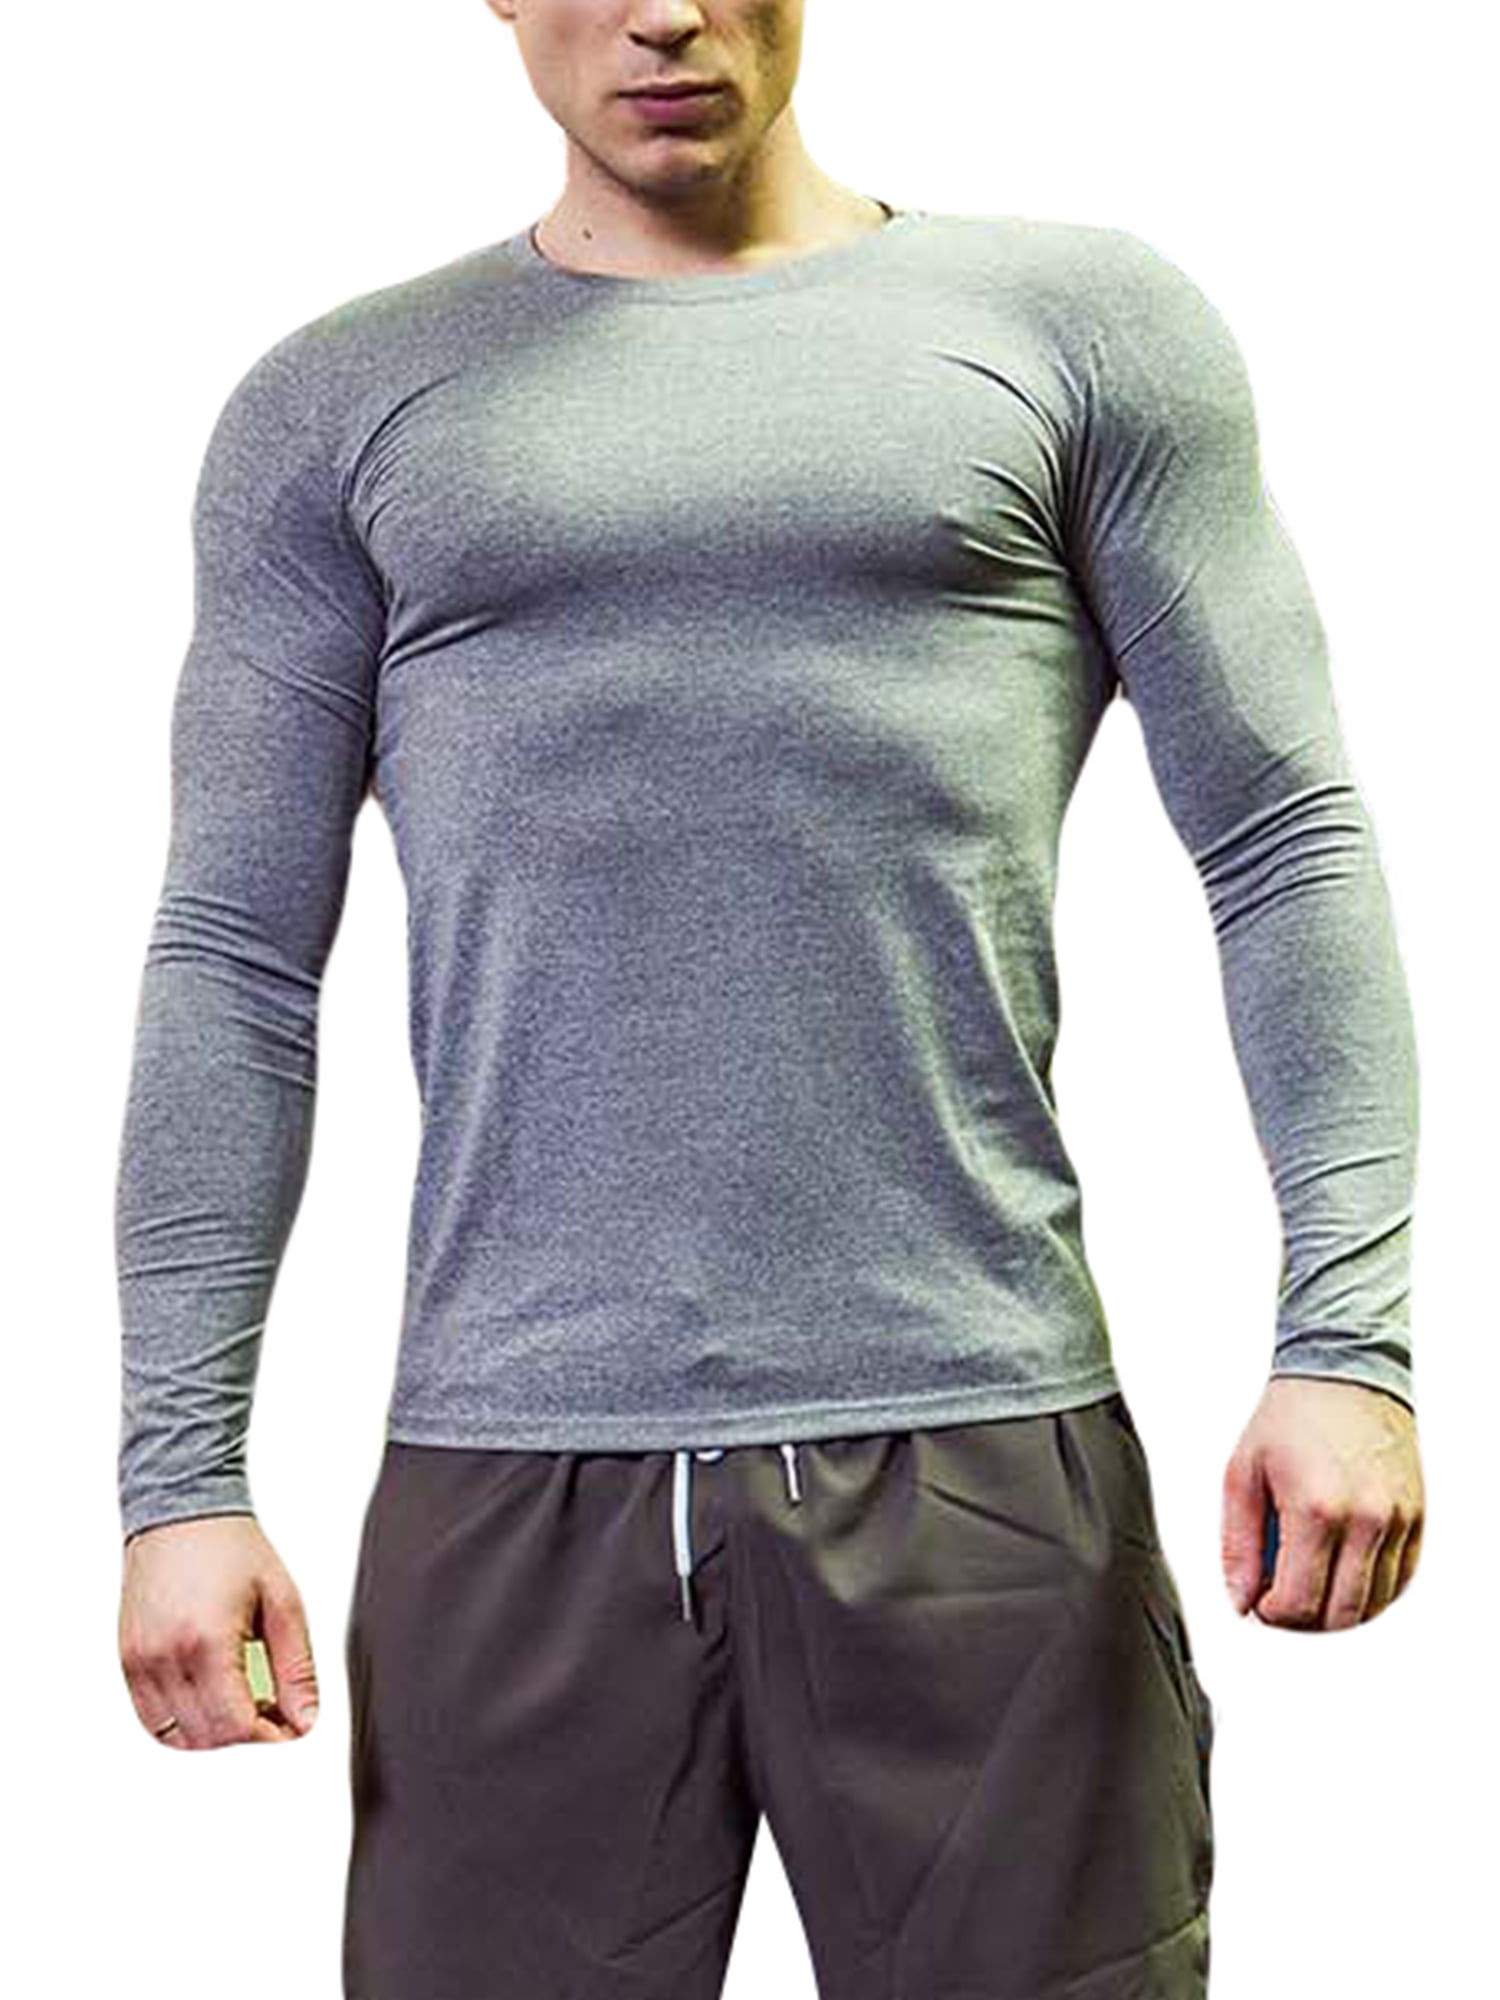 Details about   Men's Compression Tops Sports T-Shirt Under Skin Base Layer Tight Athletic Wear 